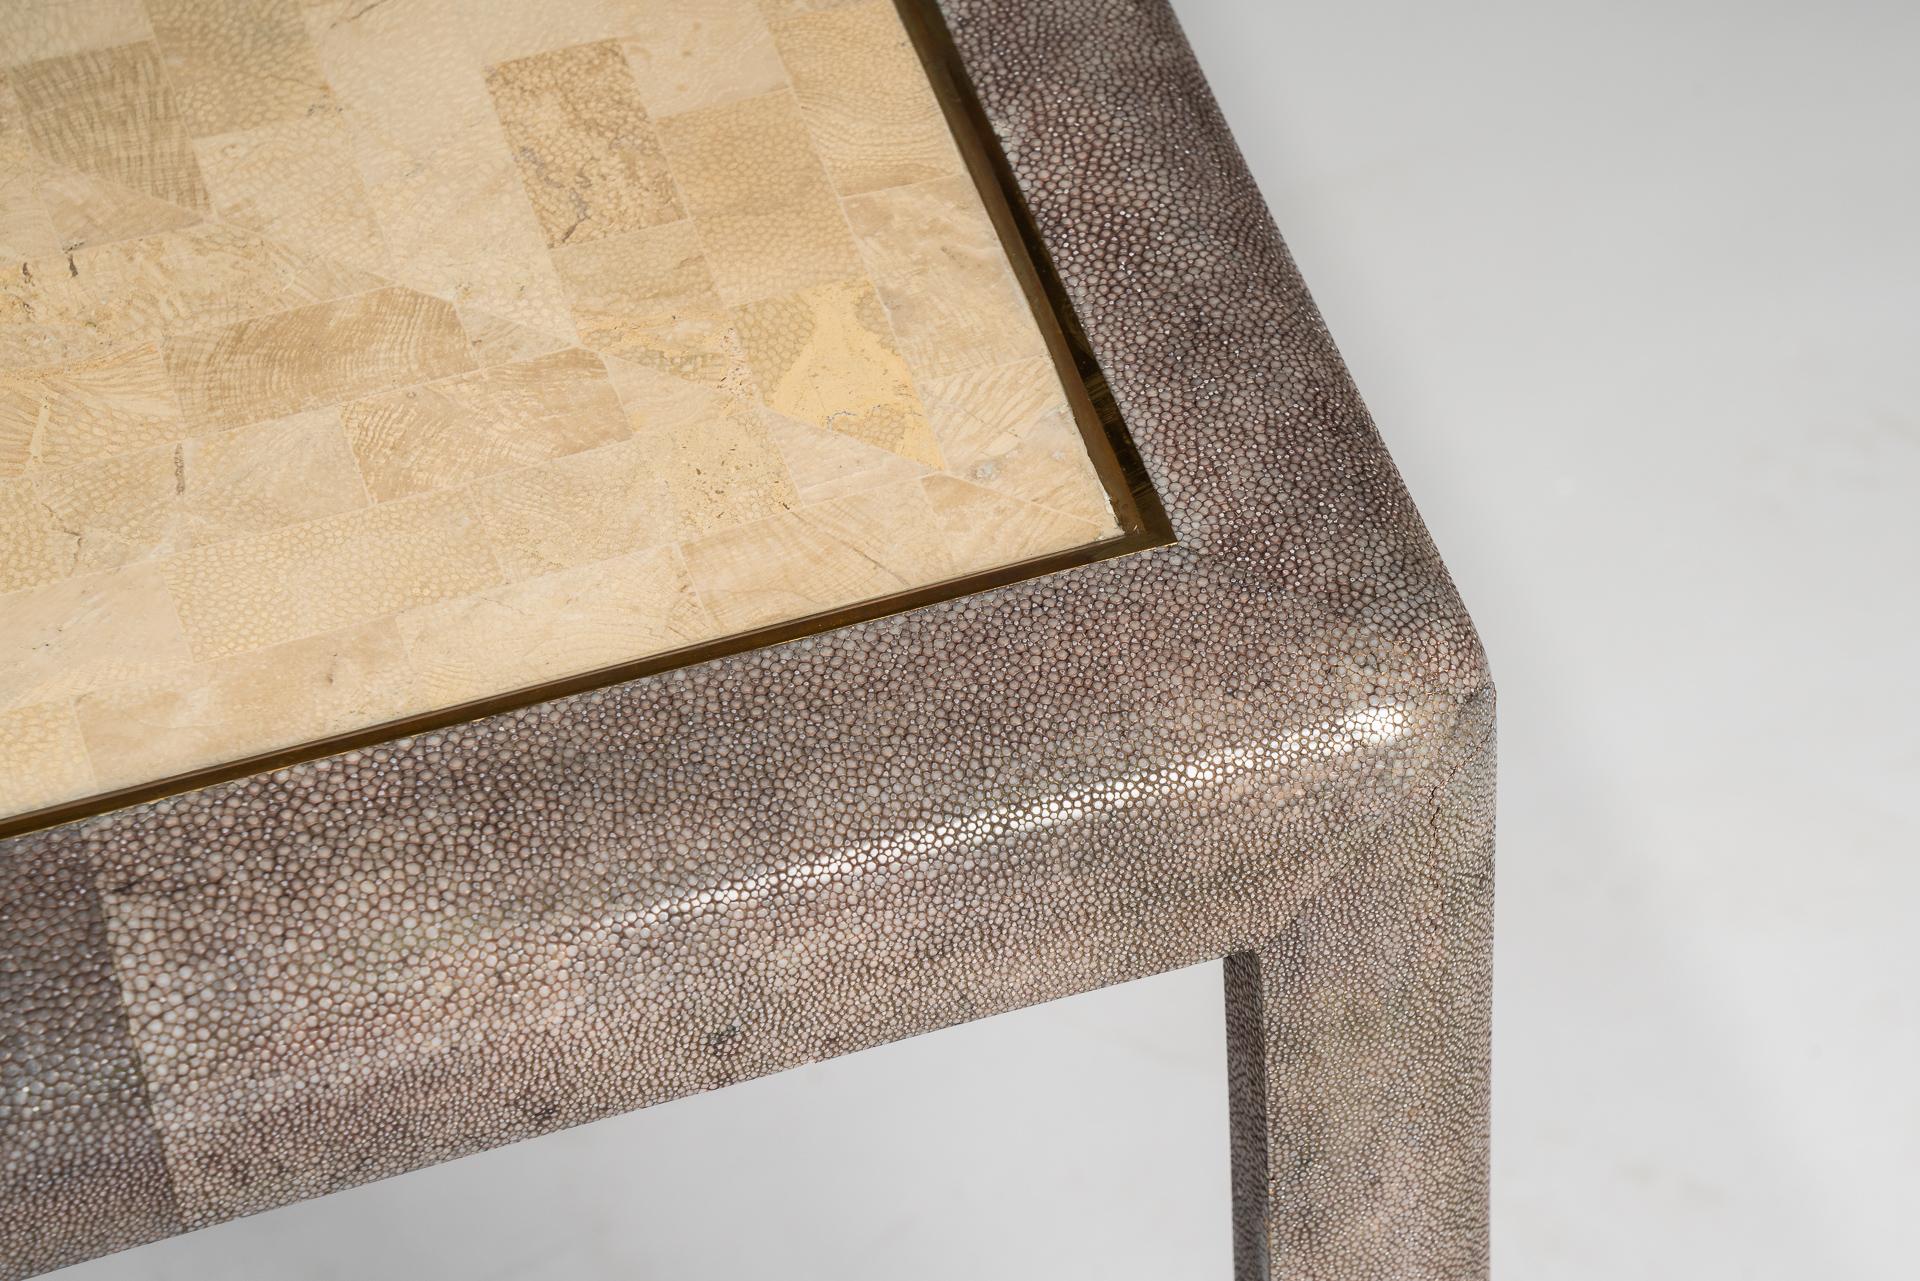 These very rare and modern pair of side tables by Maitland Smith are beautiful manufactured with the combination of the Galuchat / stingray leather which covers the legs and the sides of the table as well as a brass detail and the coral tabletop